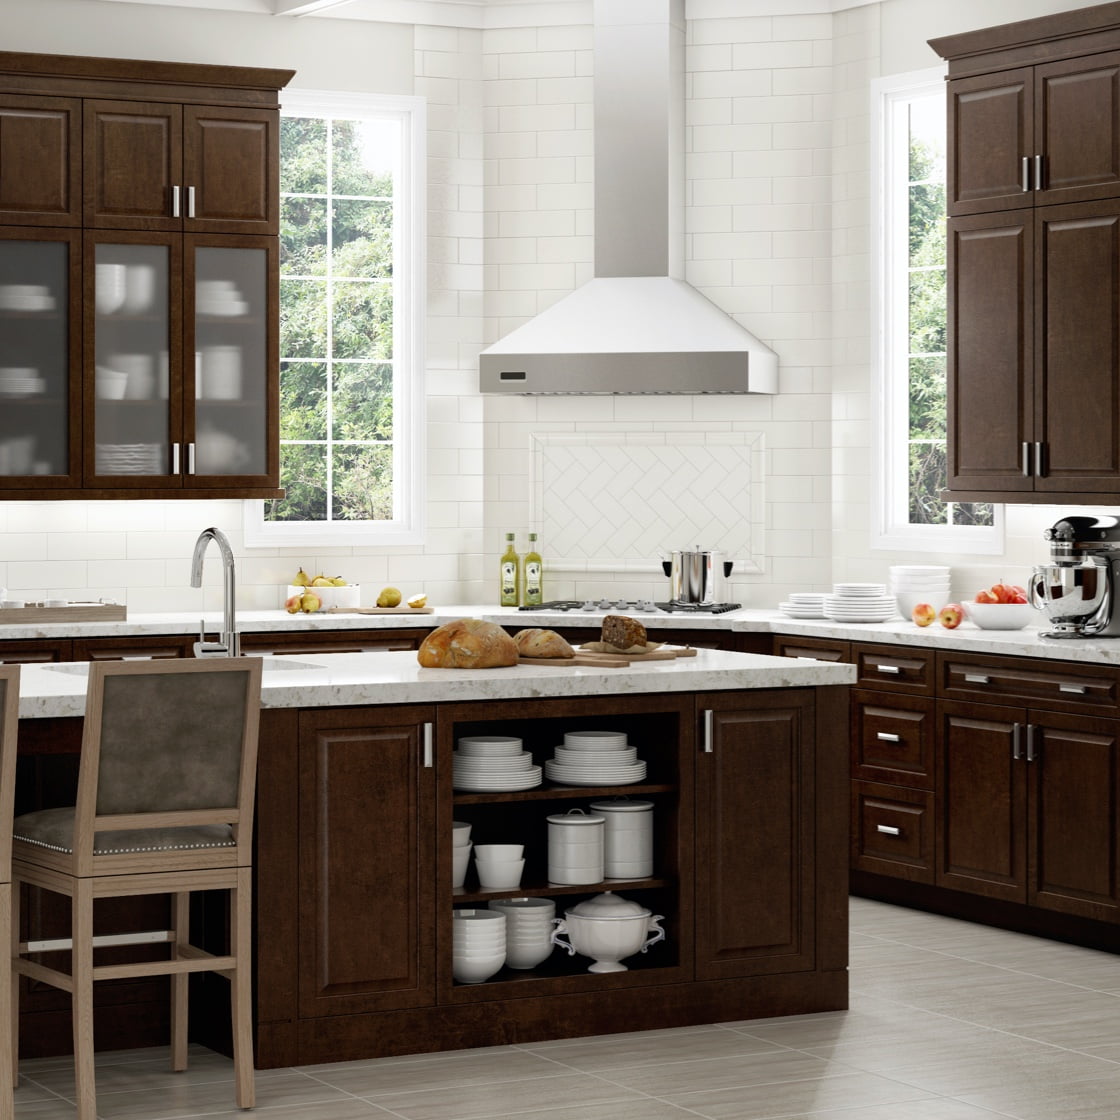 Our cabinet brands - American Woodmark